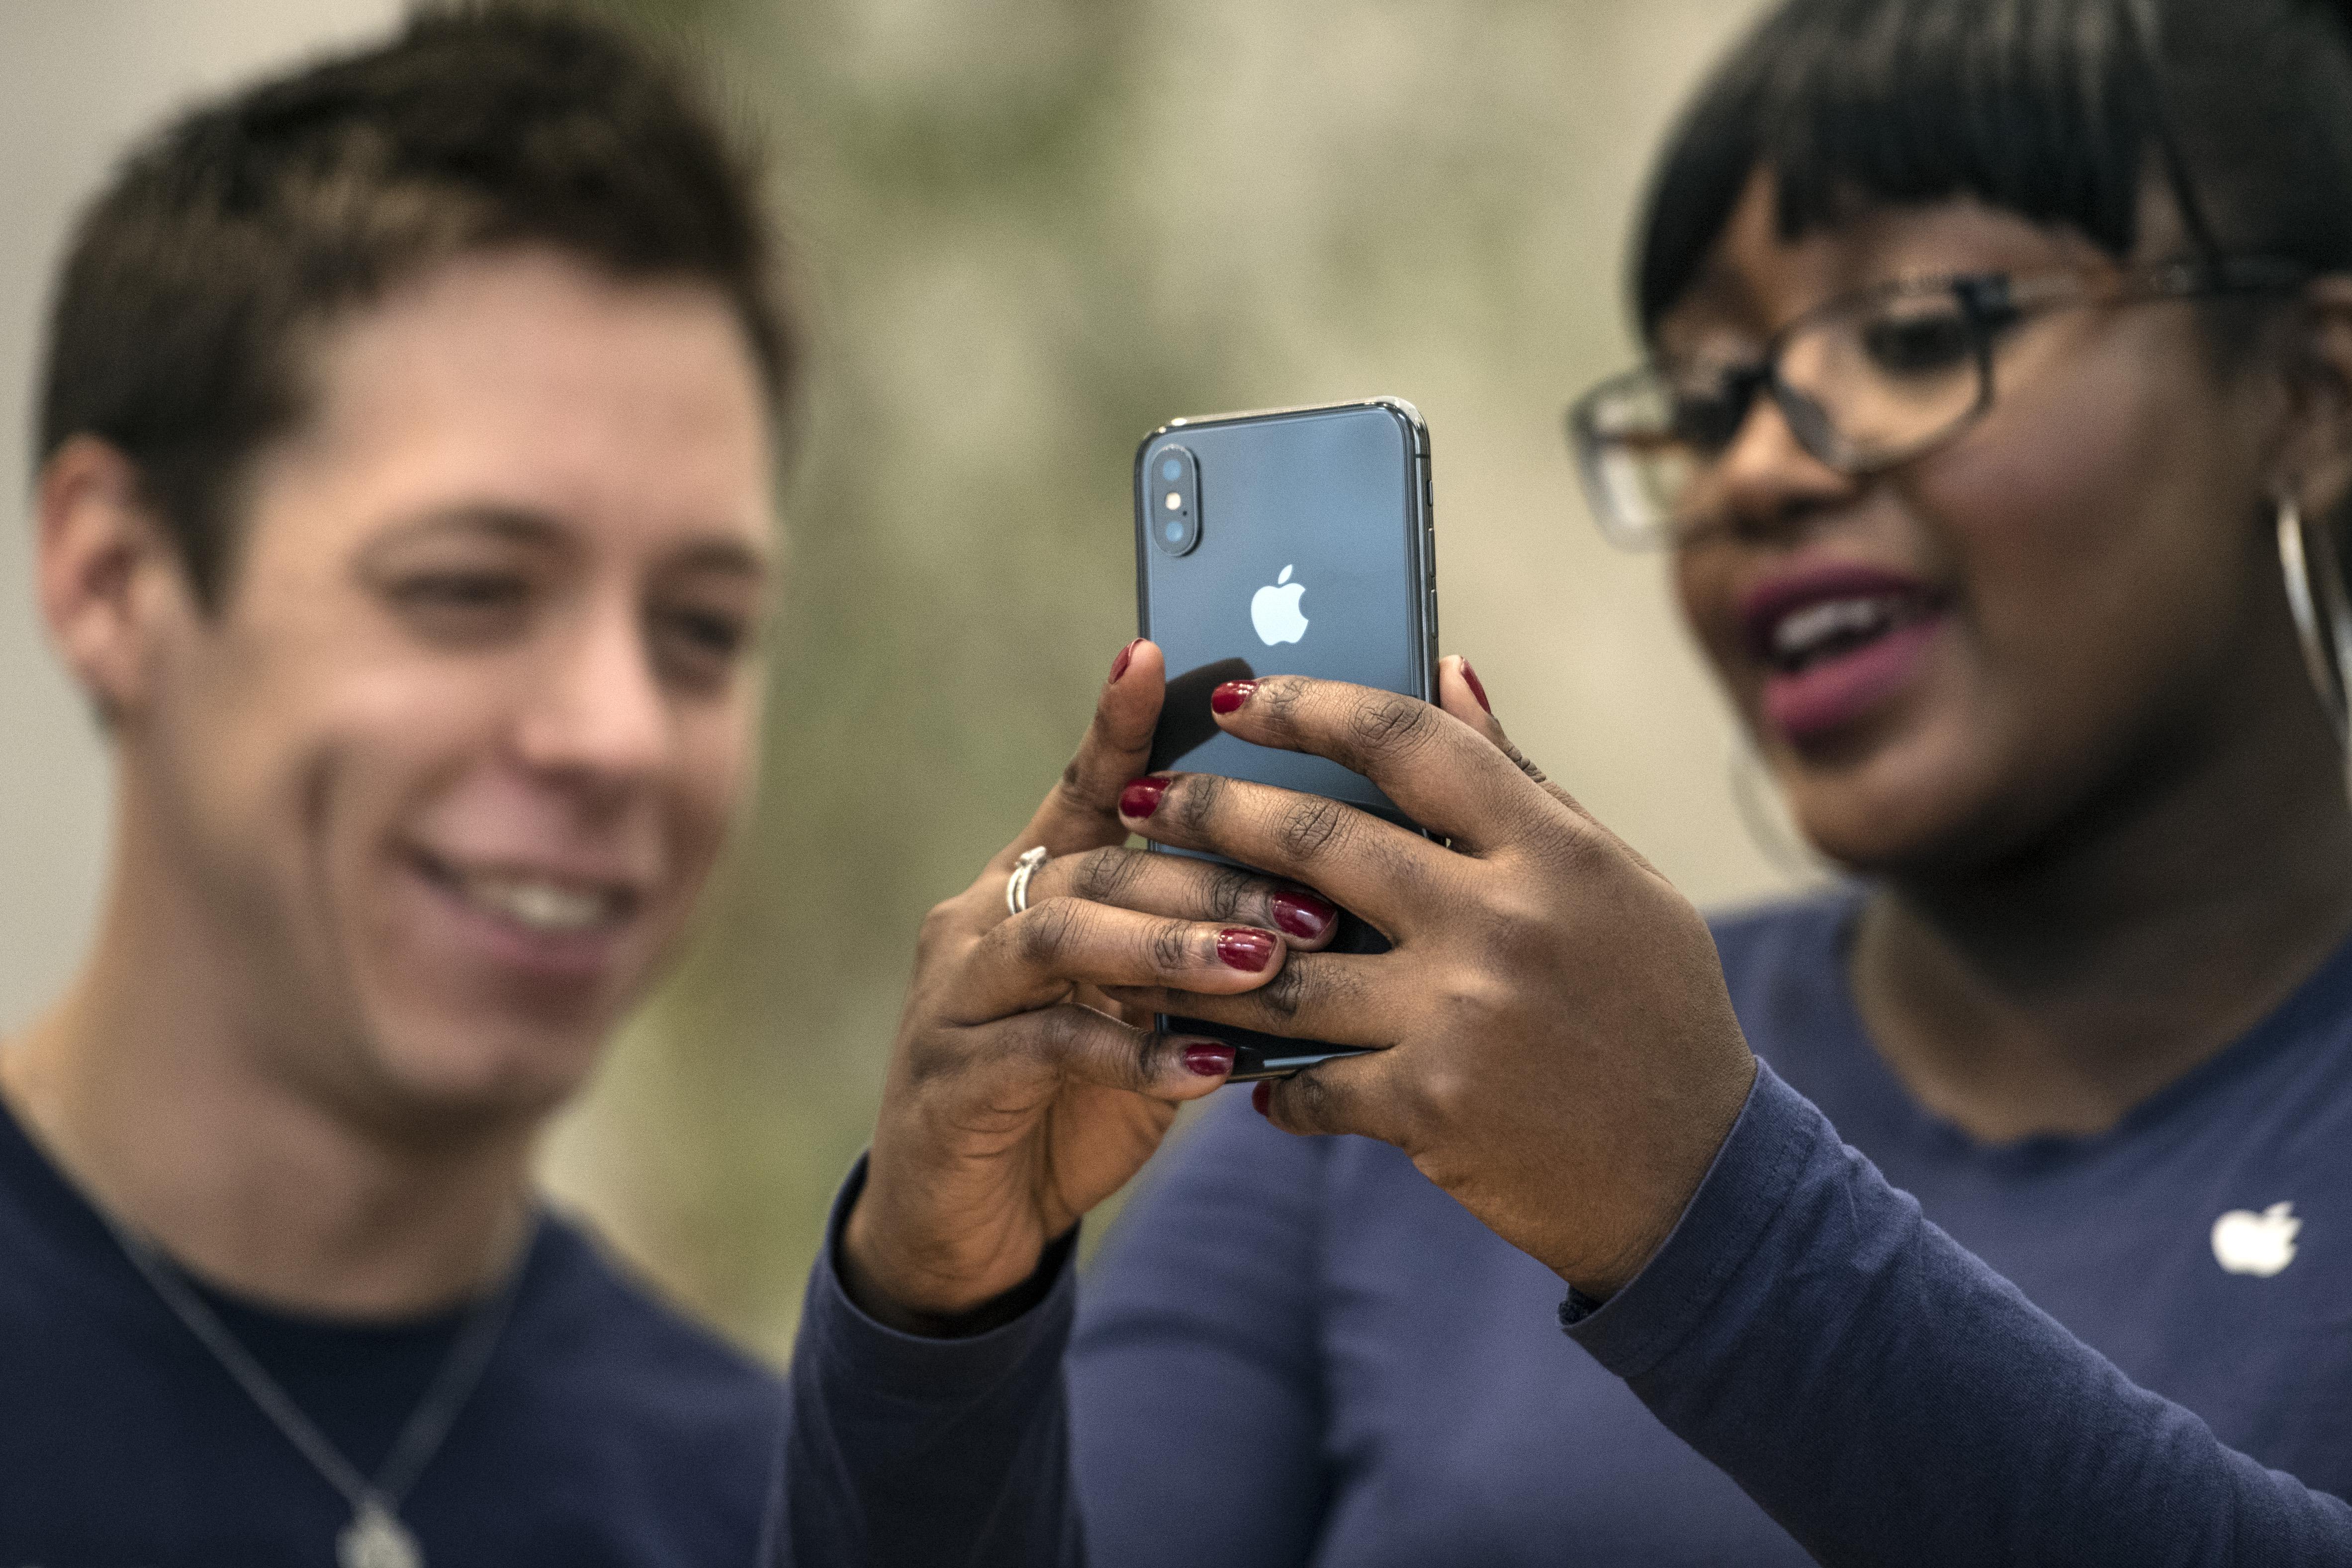 A staff member at an Apple Store in London unlocks an iPhone X with face recognition.